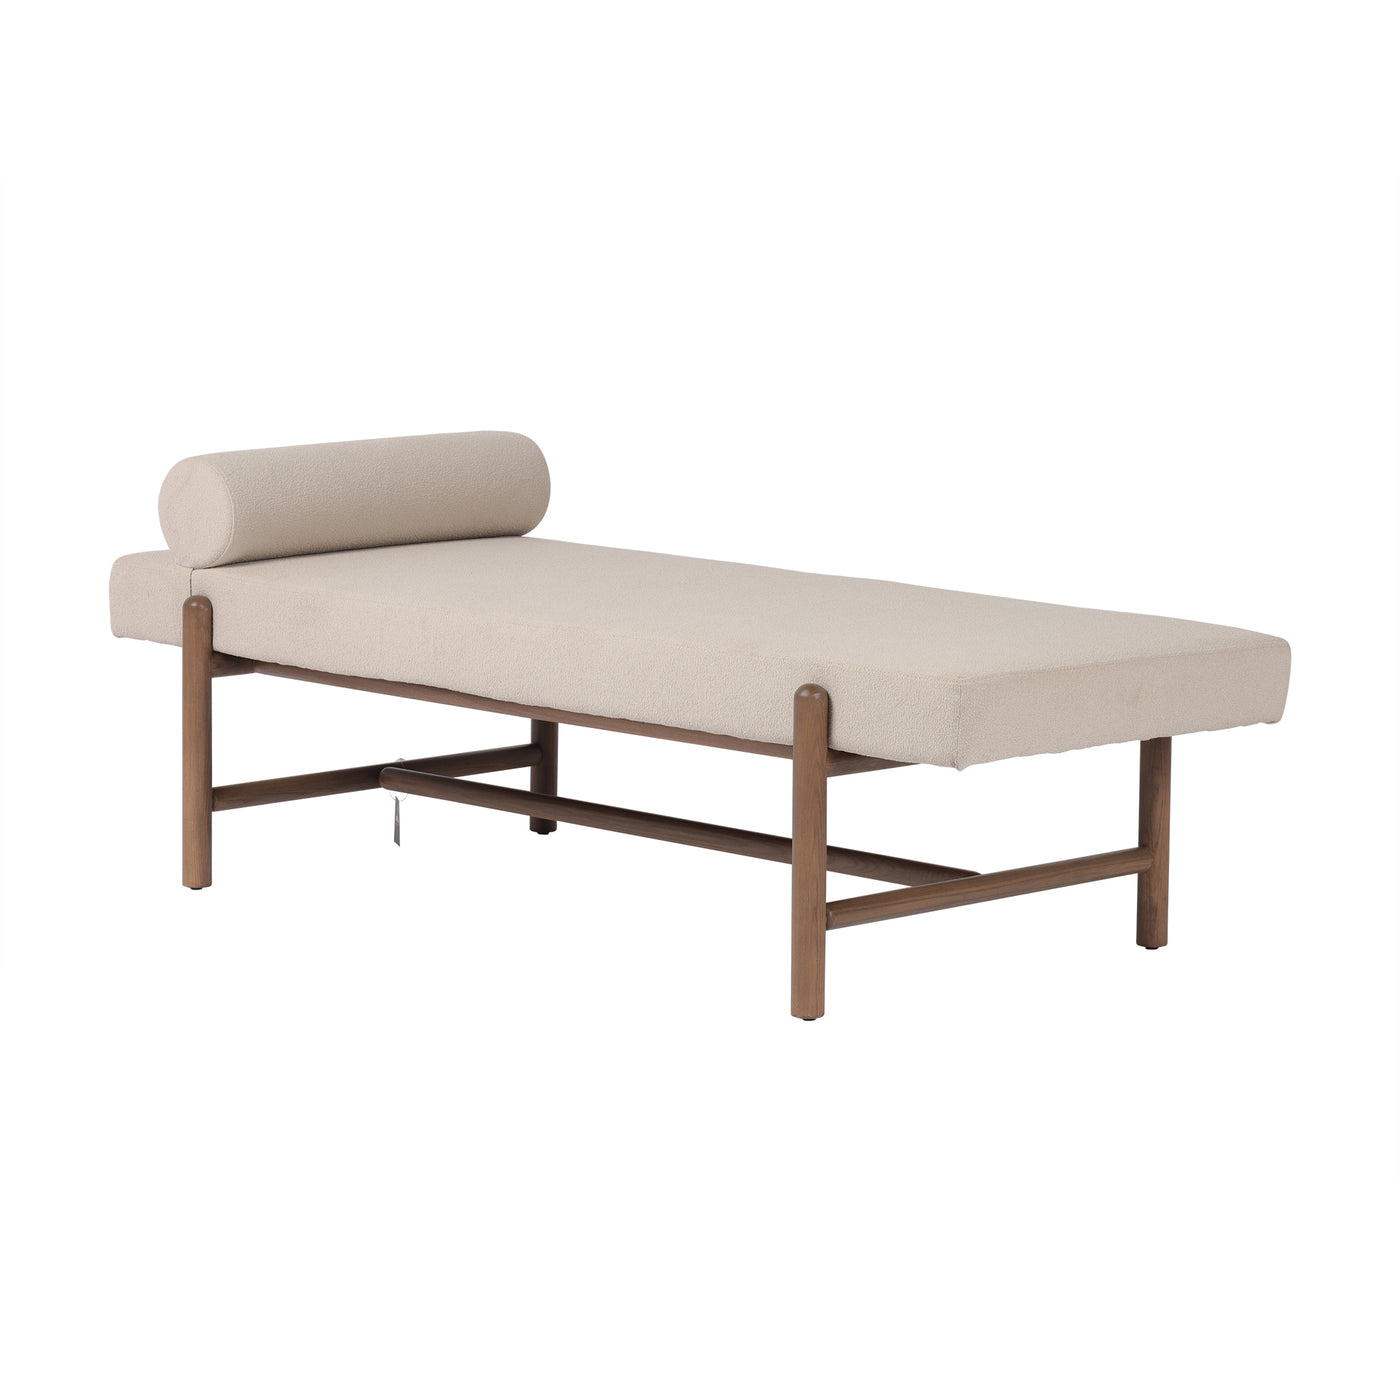 Stami Wood Day Bed